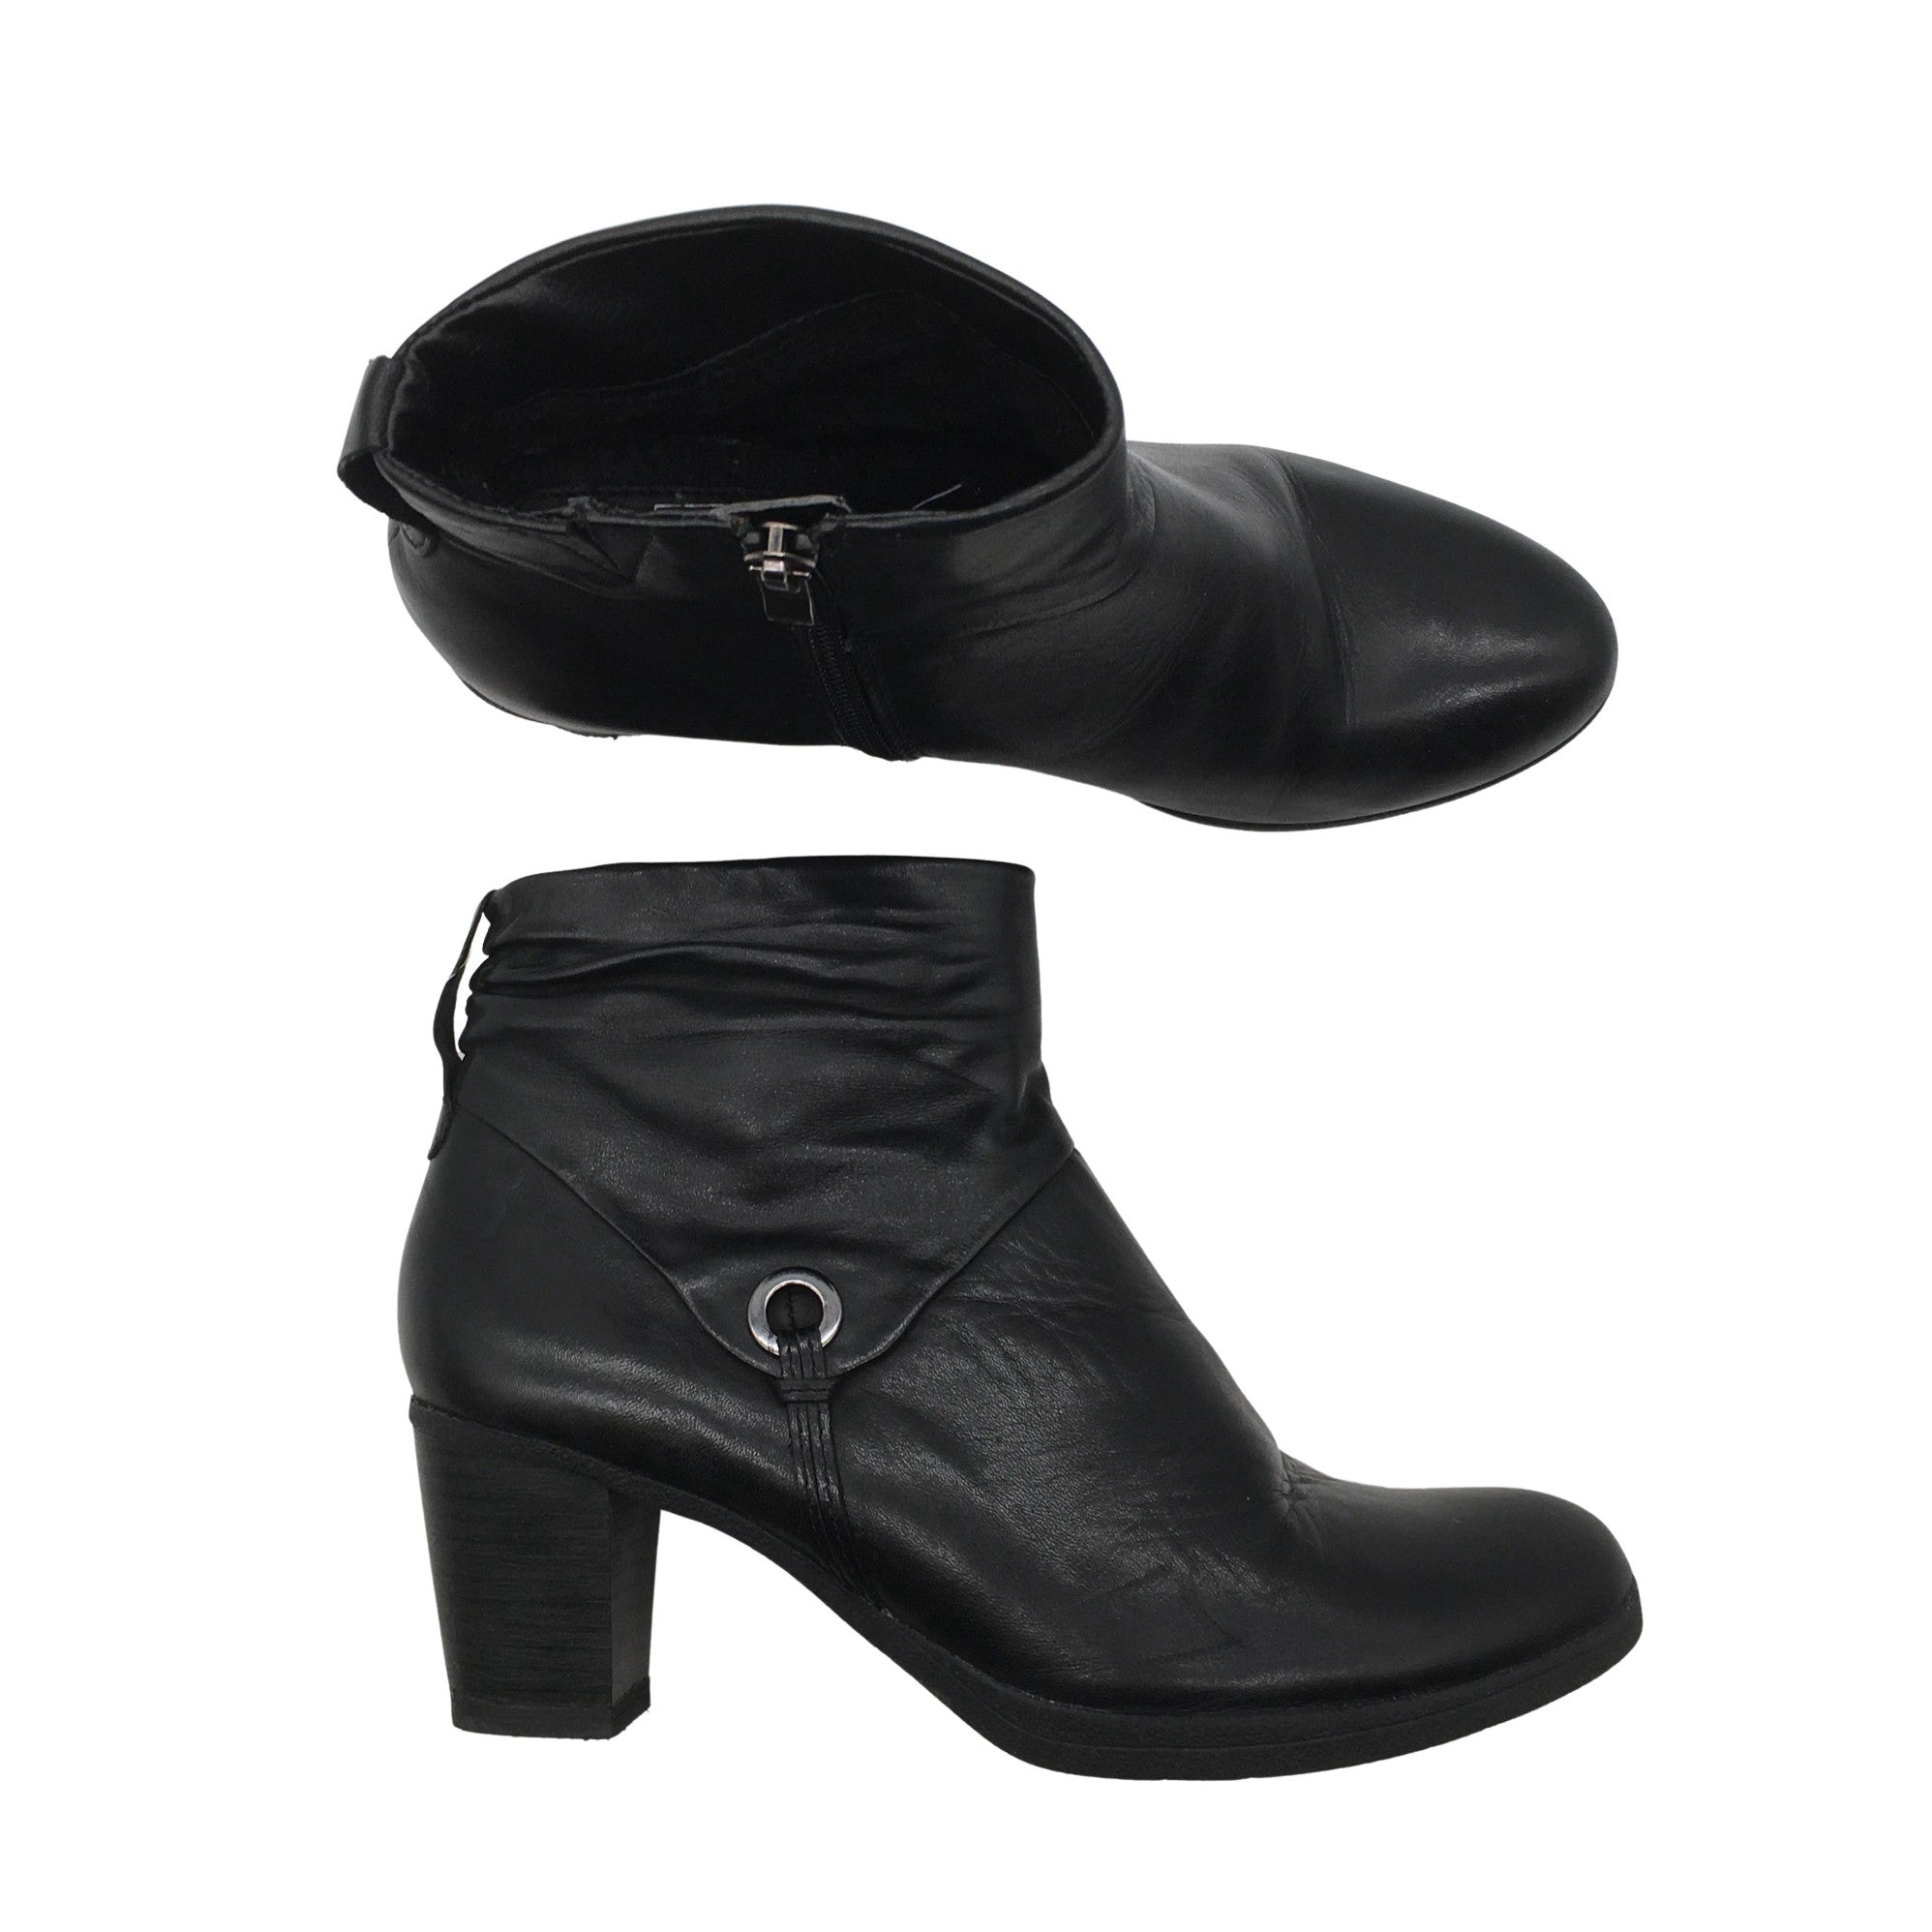 Women's Caprice Ankle boots, size 37 (Black) | Emmy